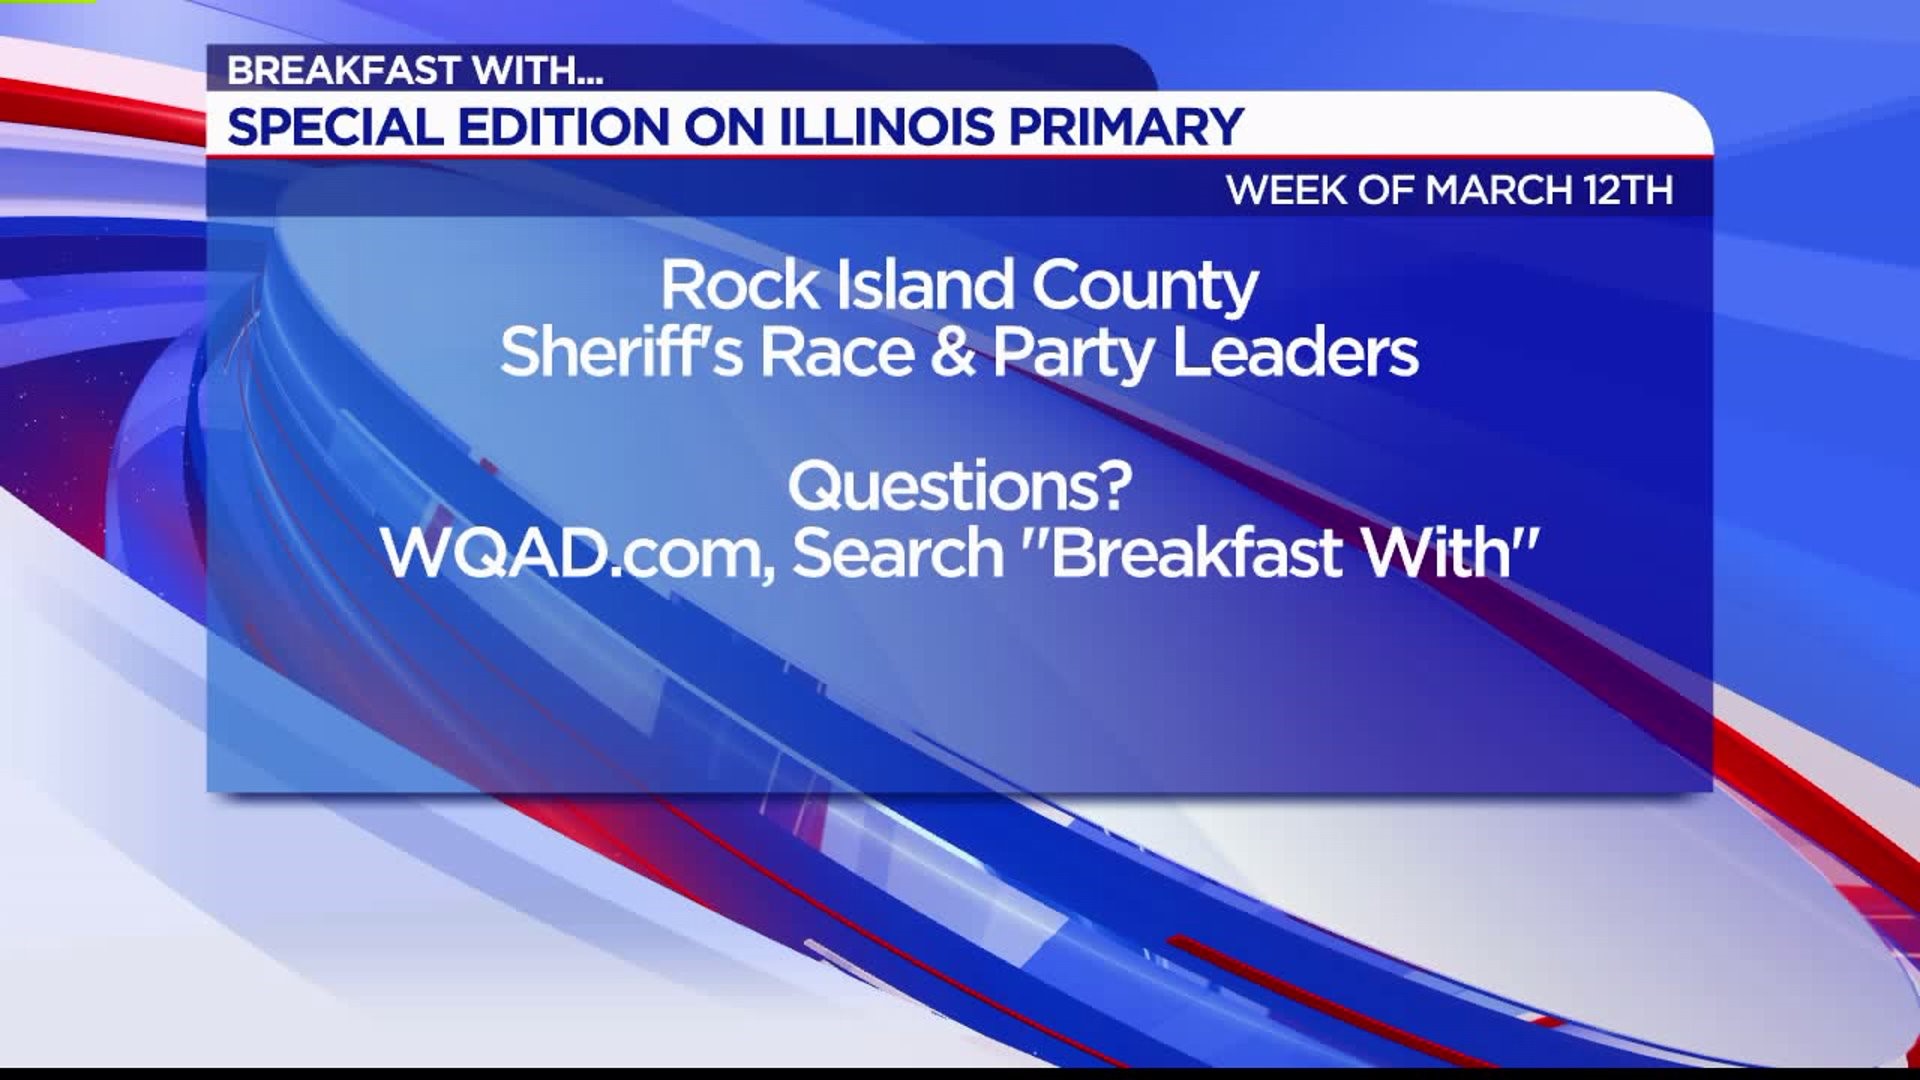 Special Edition Breakfast With...: The Illinois Primary